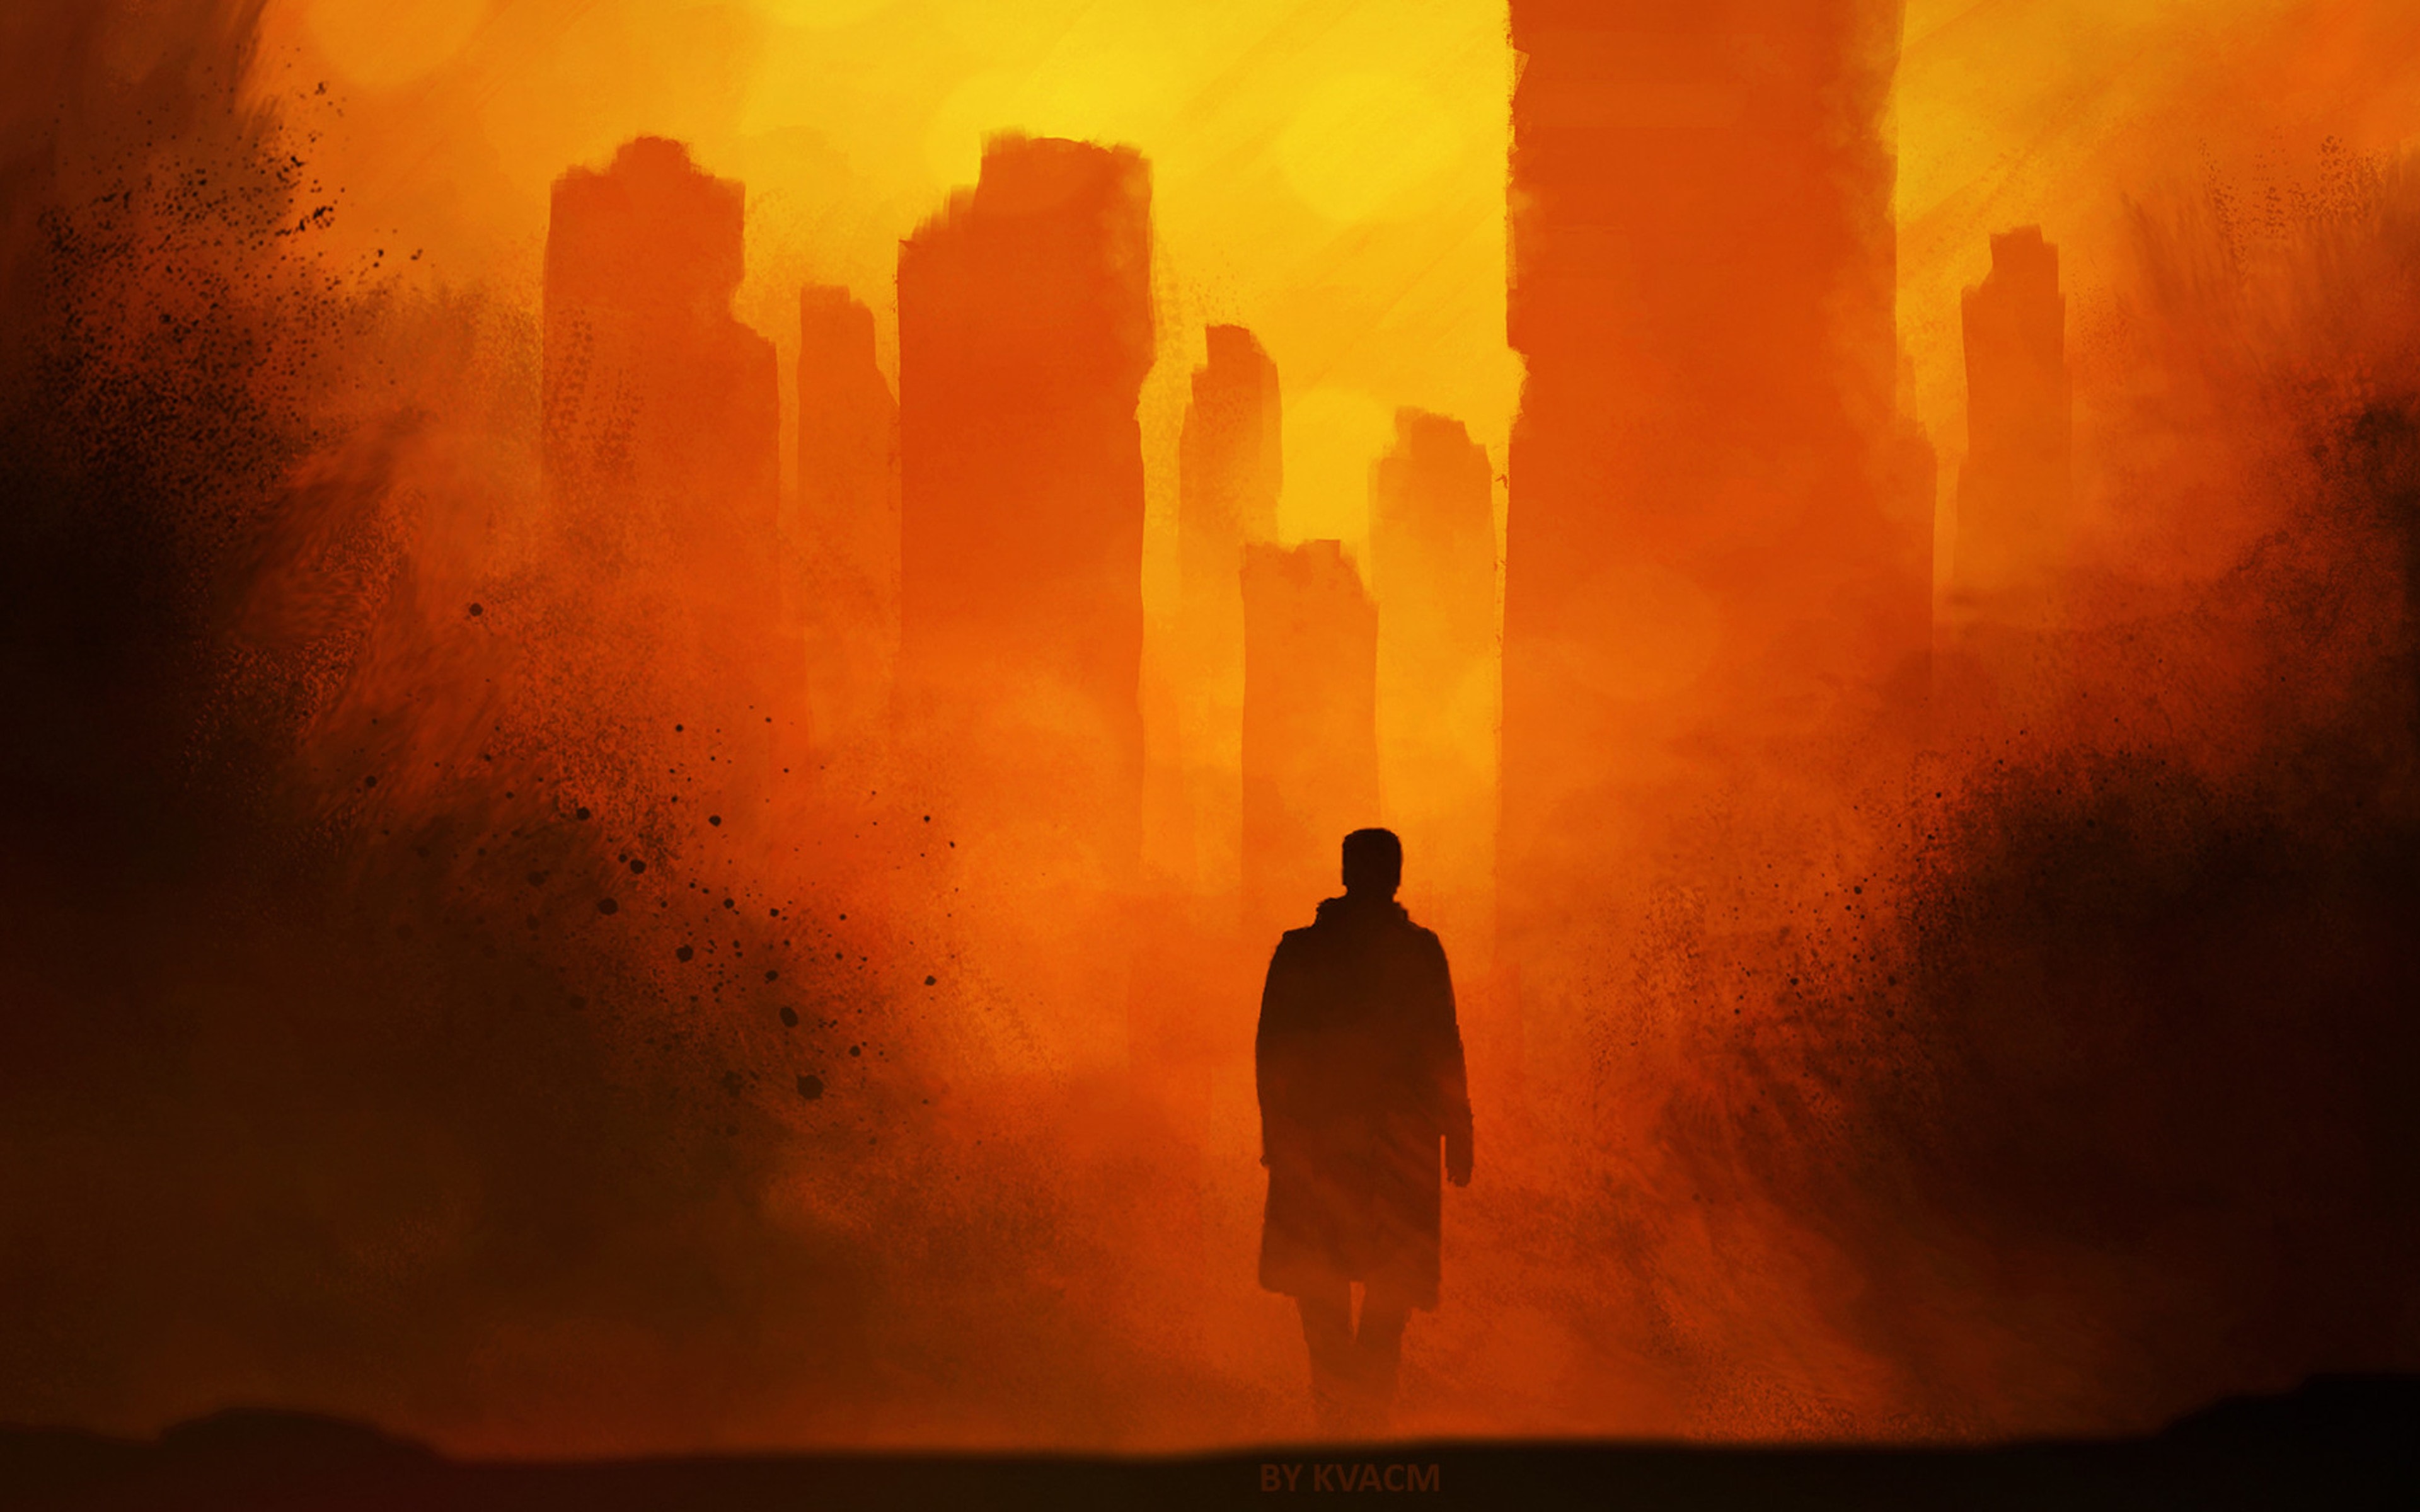 Blade runner 2049 city artwork 1729 Wallpapers and Free Stock